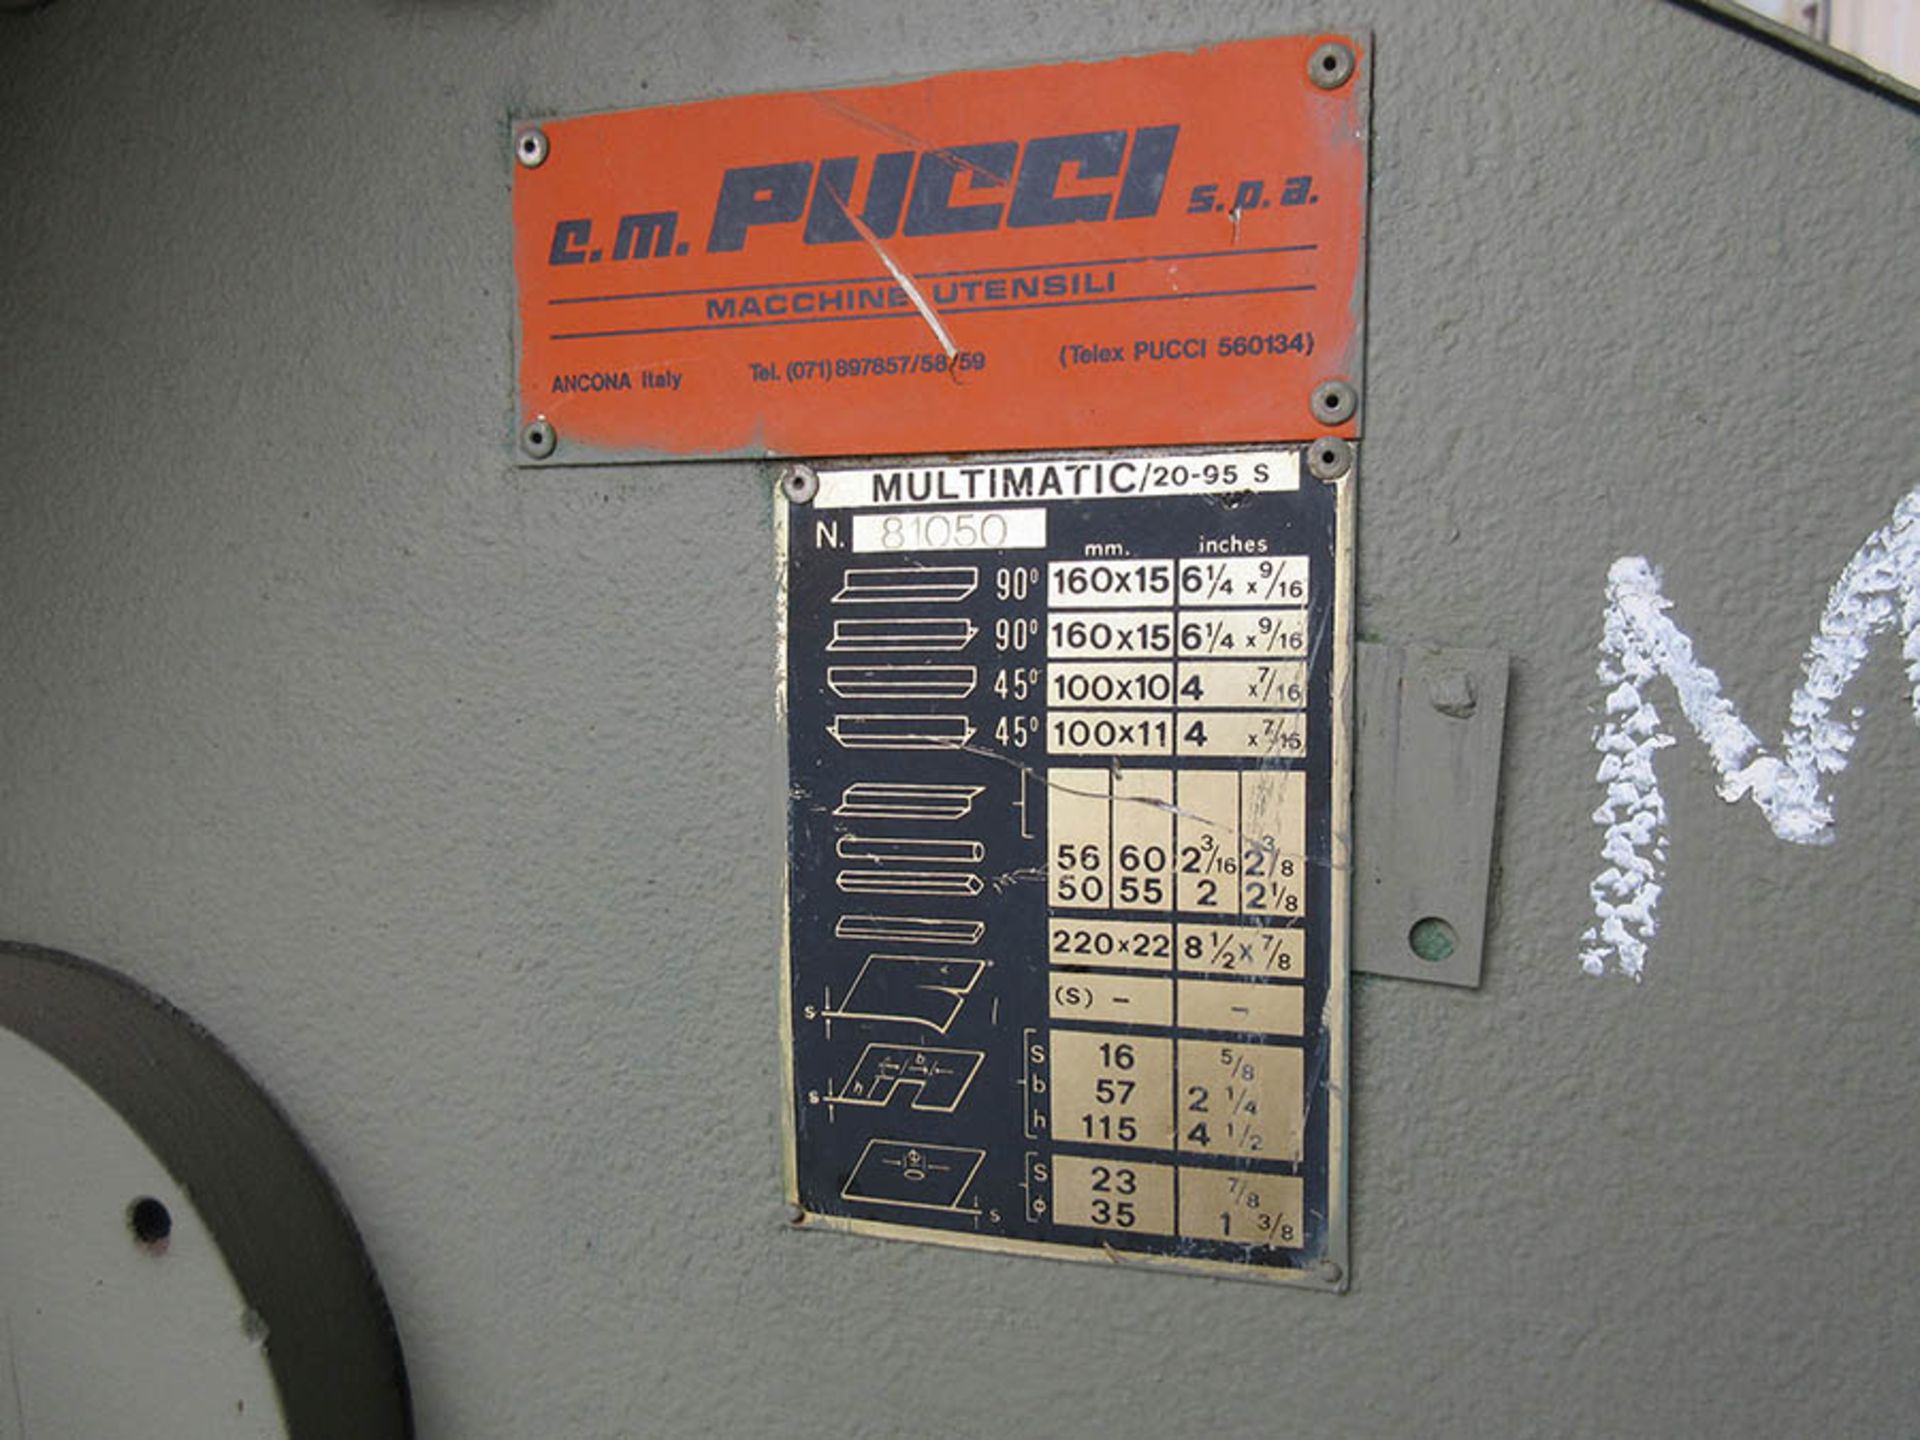 PUCCI MULTIMATIC 20-95S IRONWORKER, S/N 81050 - Image 5 of 5